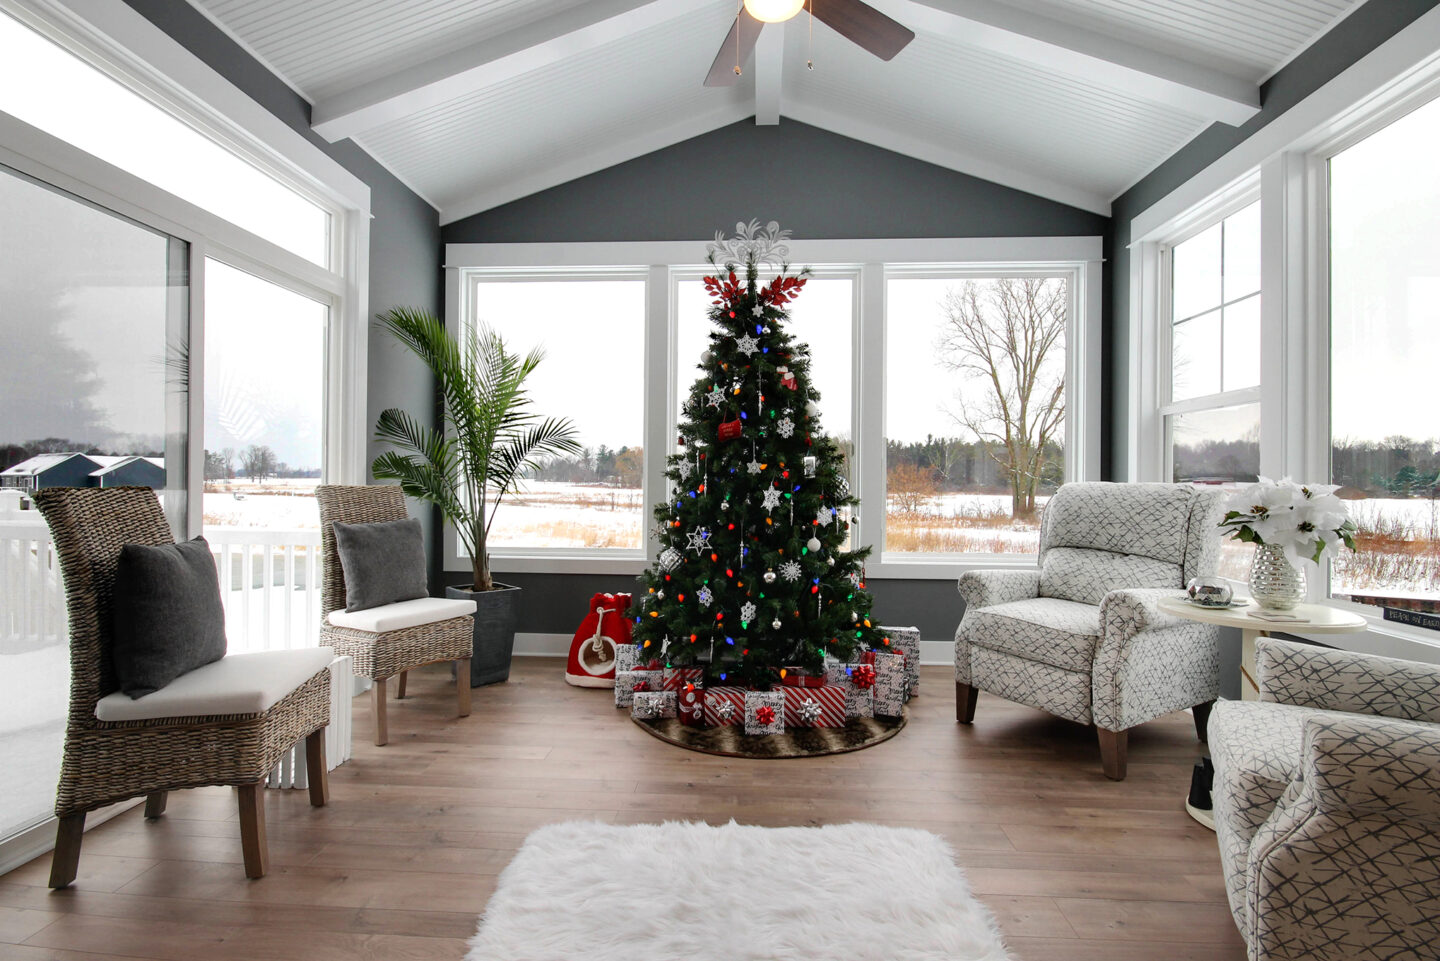 Home for the Holidays - The Willow by Carolyn | Eastbrook Homes